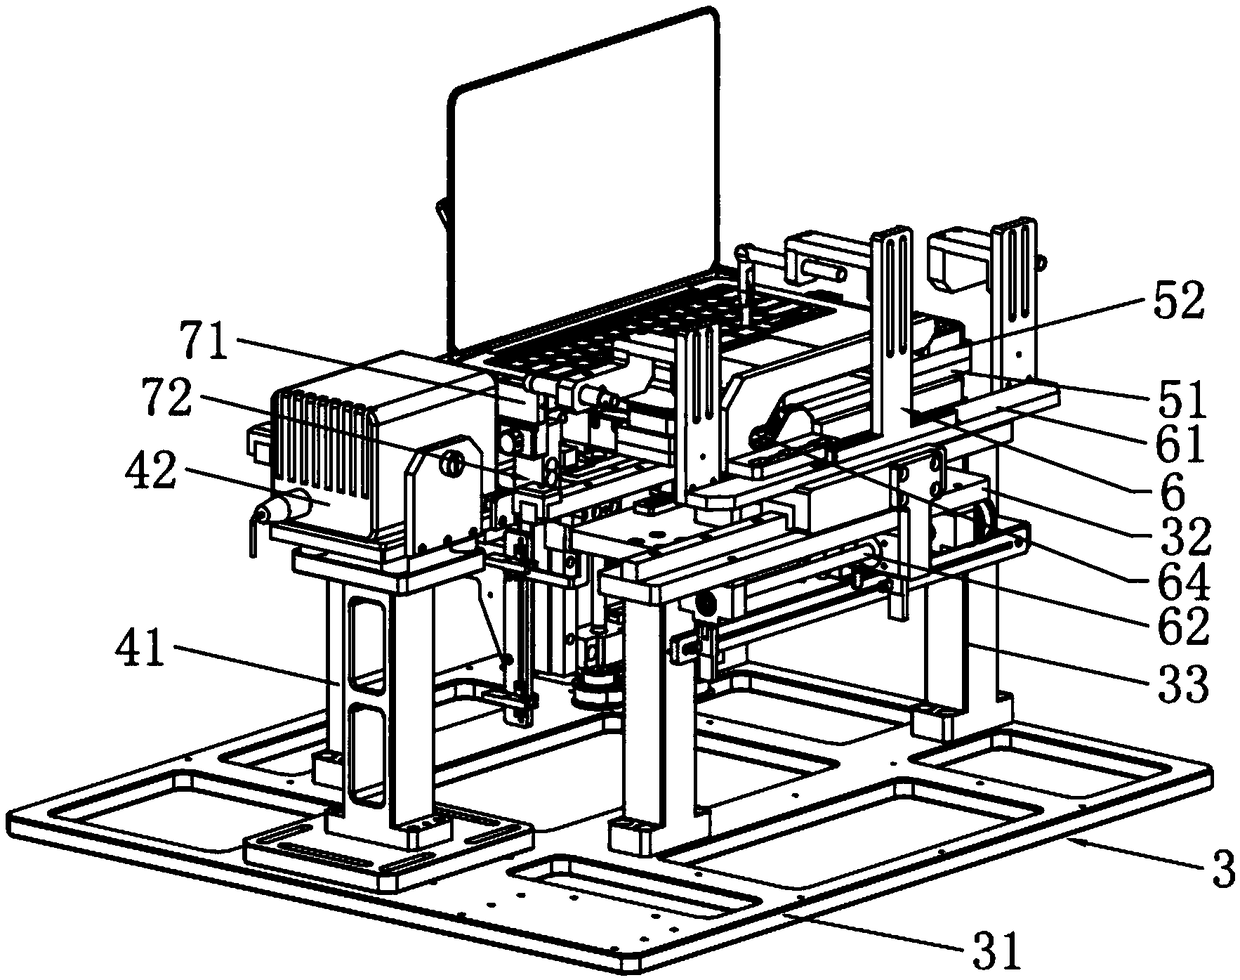 Automatic acoustic testing device applied to notebook computer